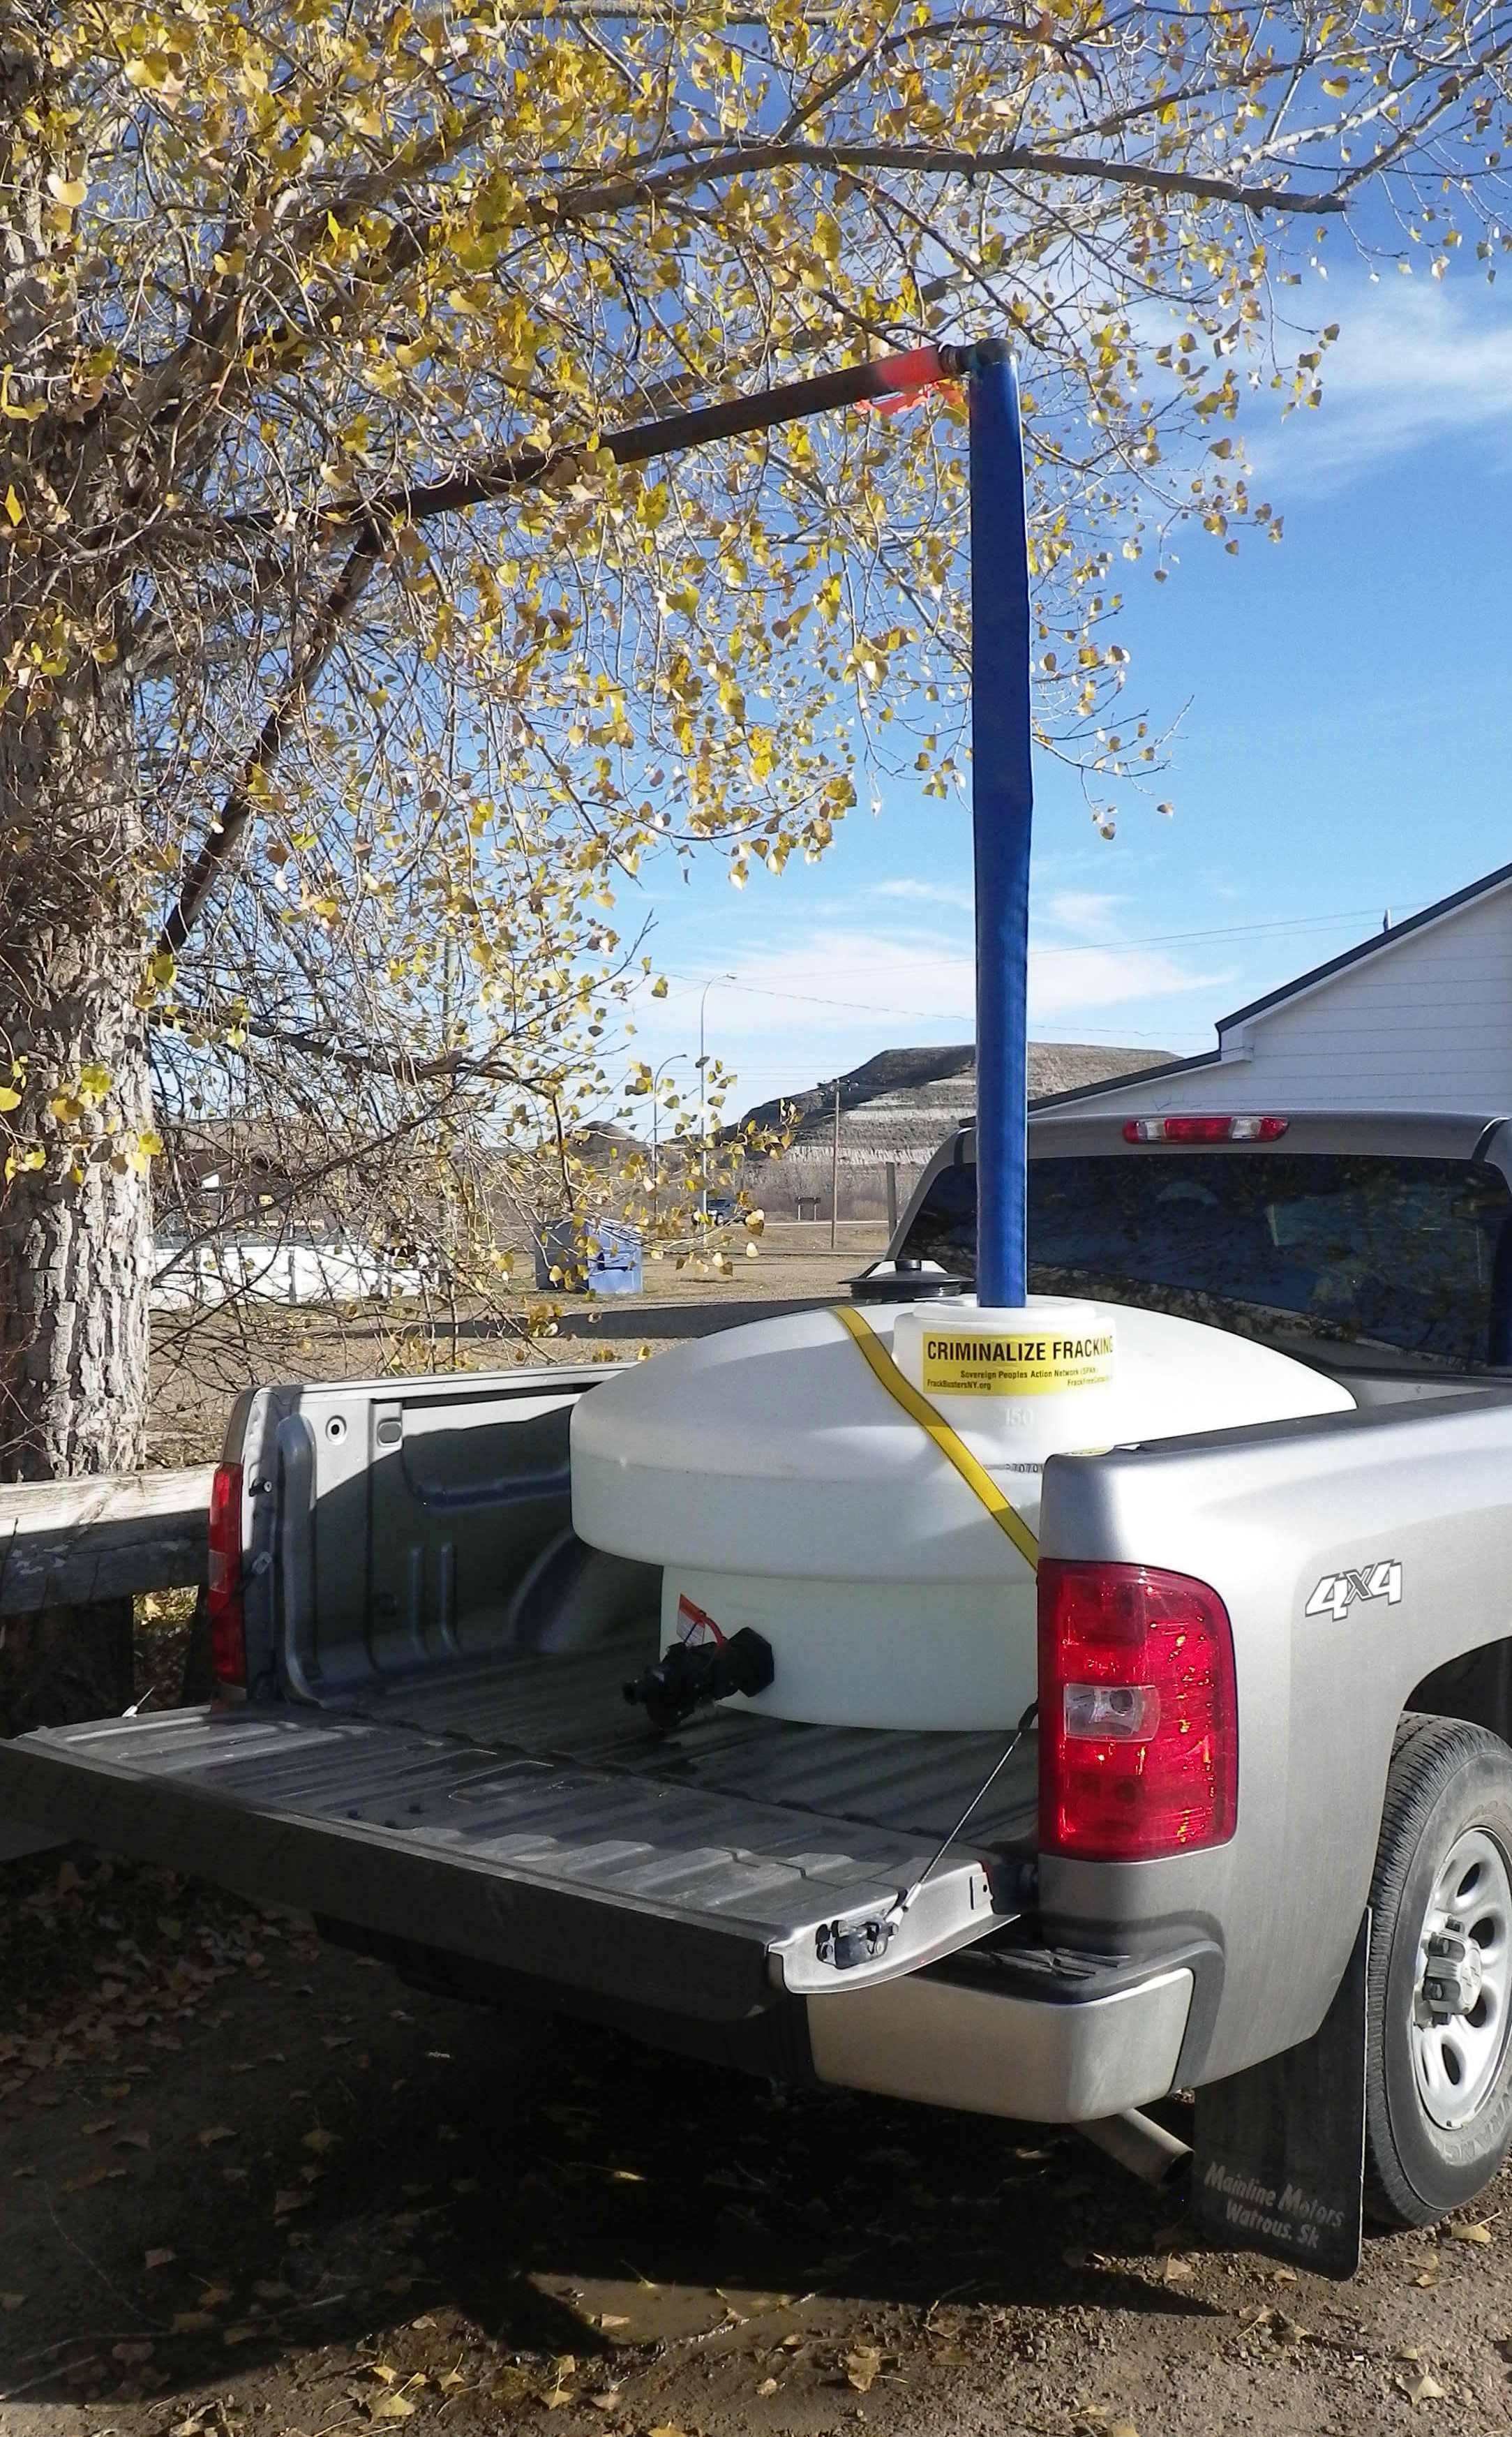 2015 10 21 Ernst hauling water from Rosedale, 45 minutes one way drive from Rosebud, NY criminalize fracing sticker on tank